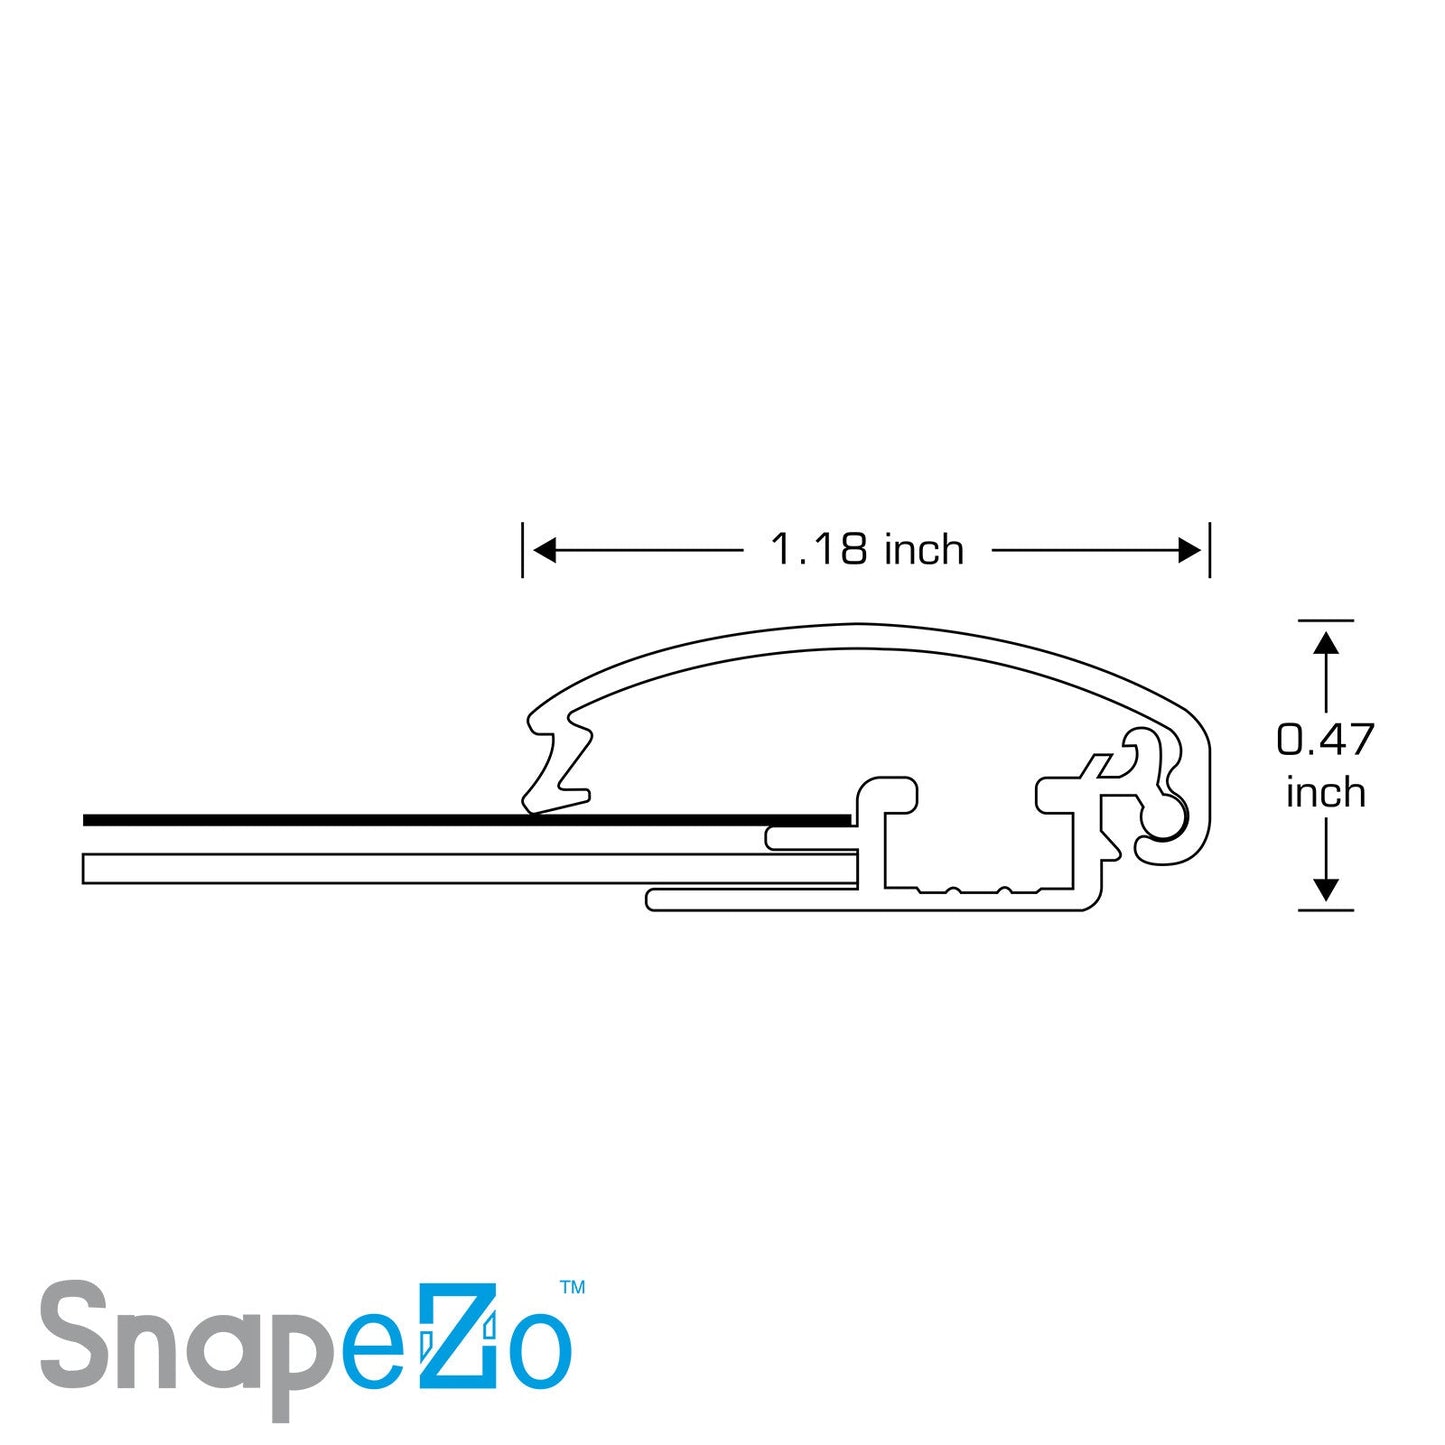 Load image into Gallery viewer, 33x33 White SnapeZo® Snap Frame - 1.2&amp;quot; Profile
